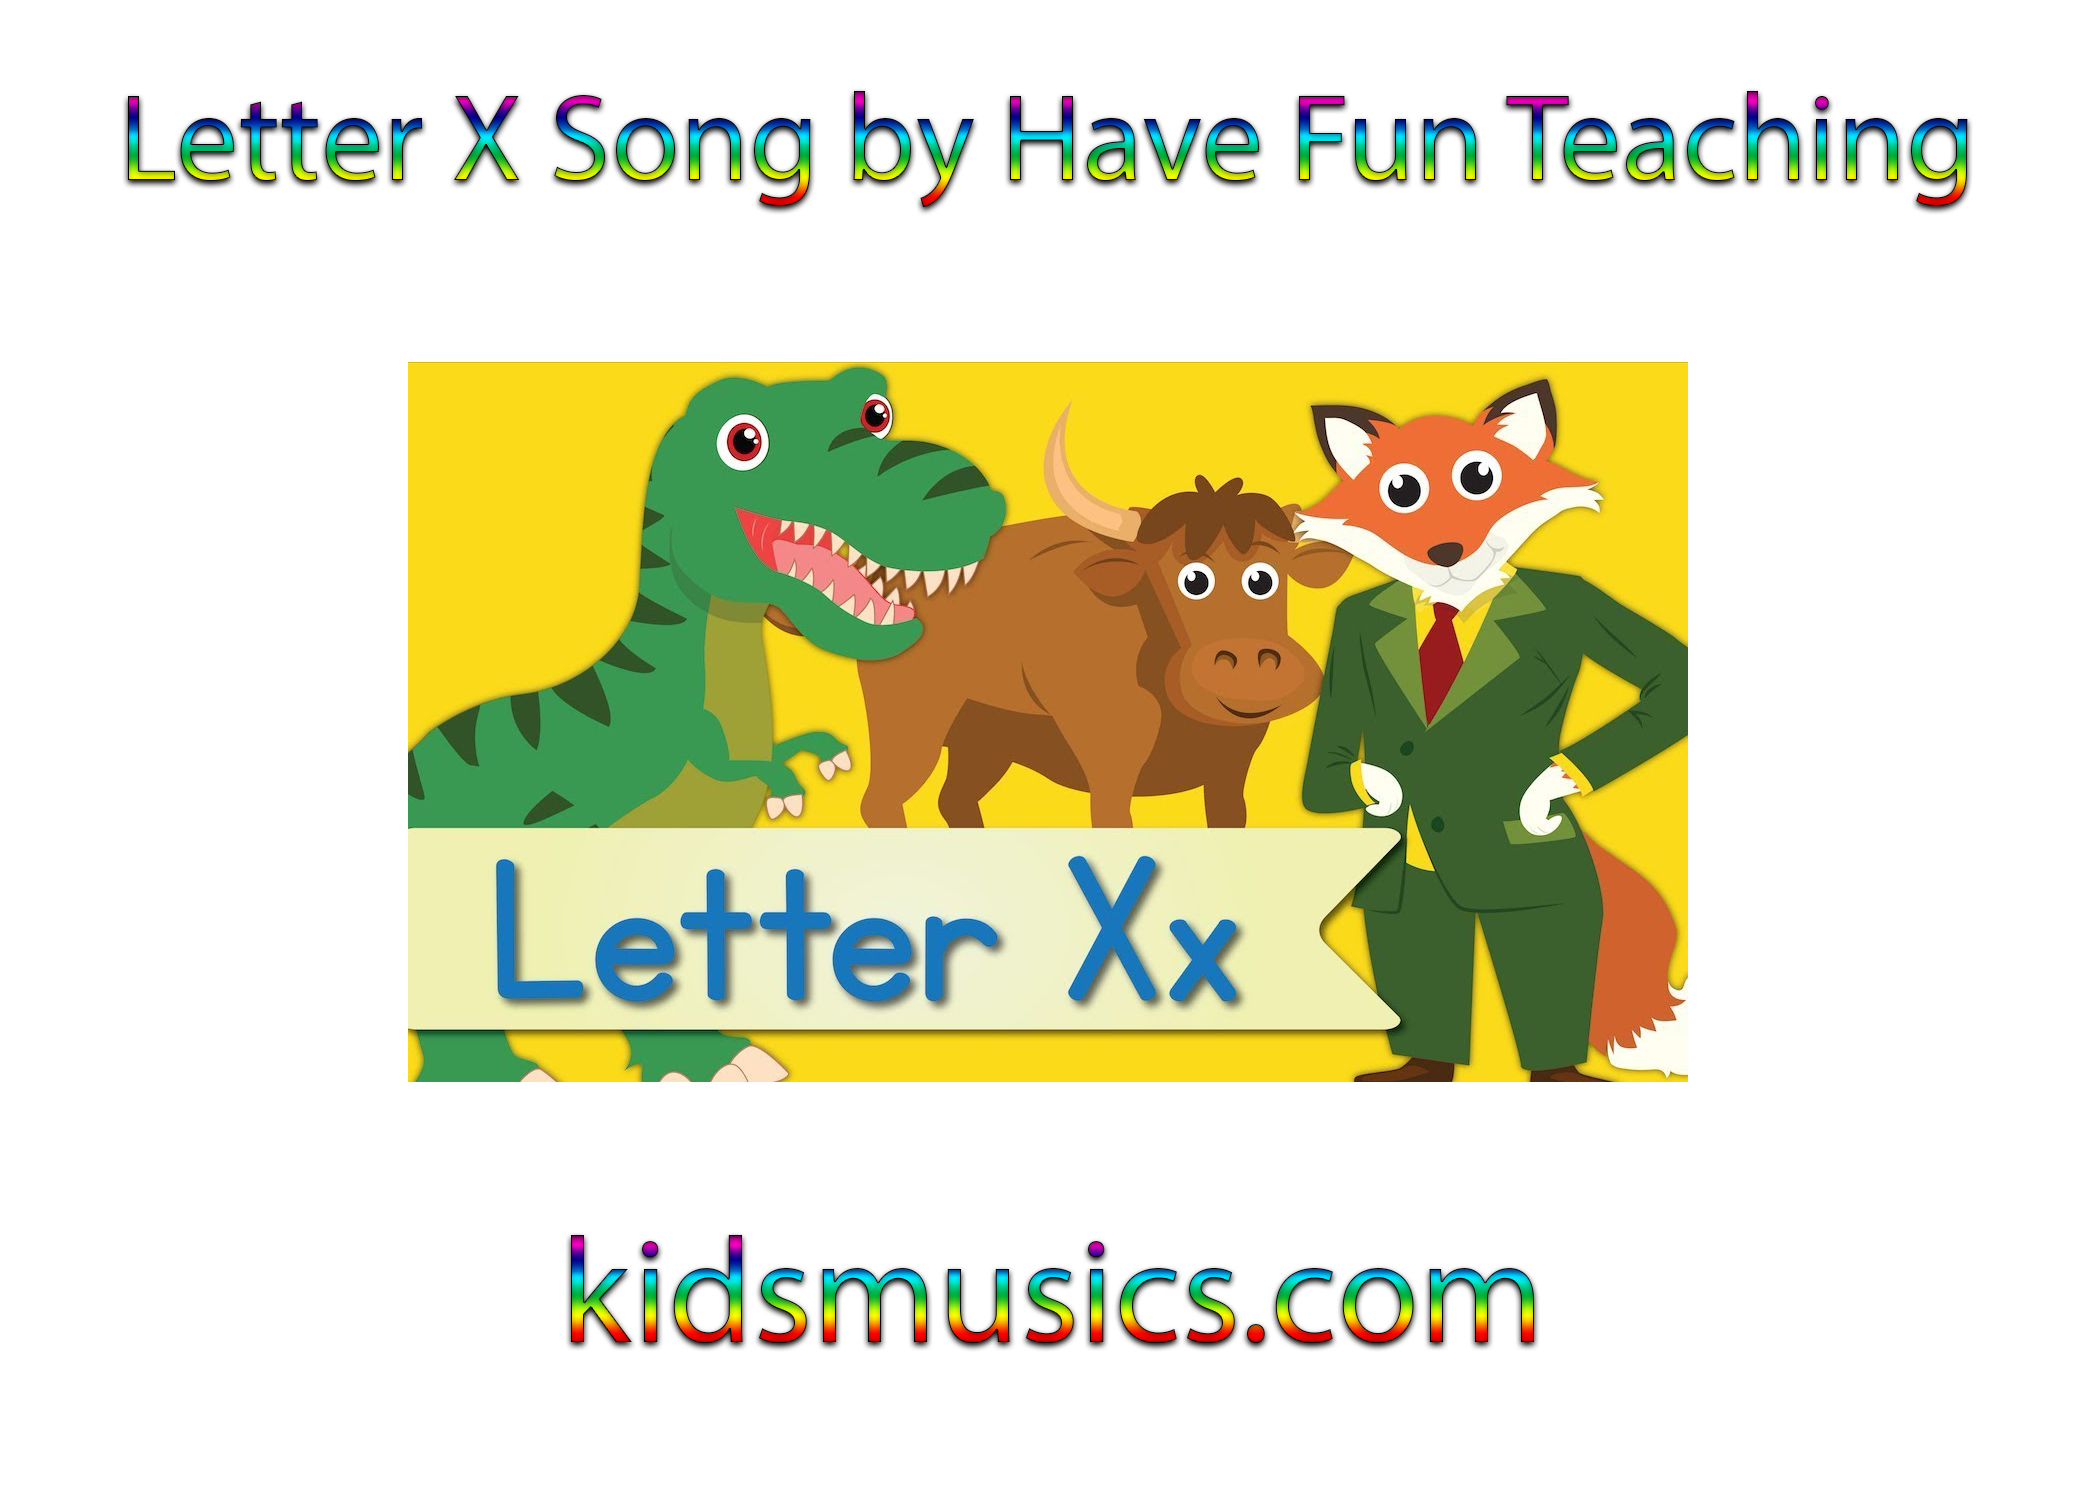 Letter X Song by Have Fun Teaching